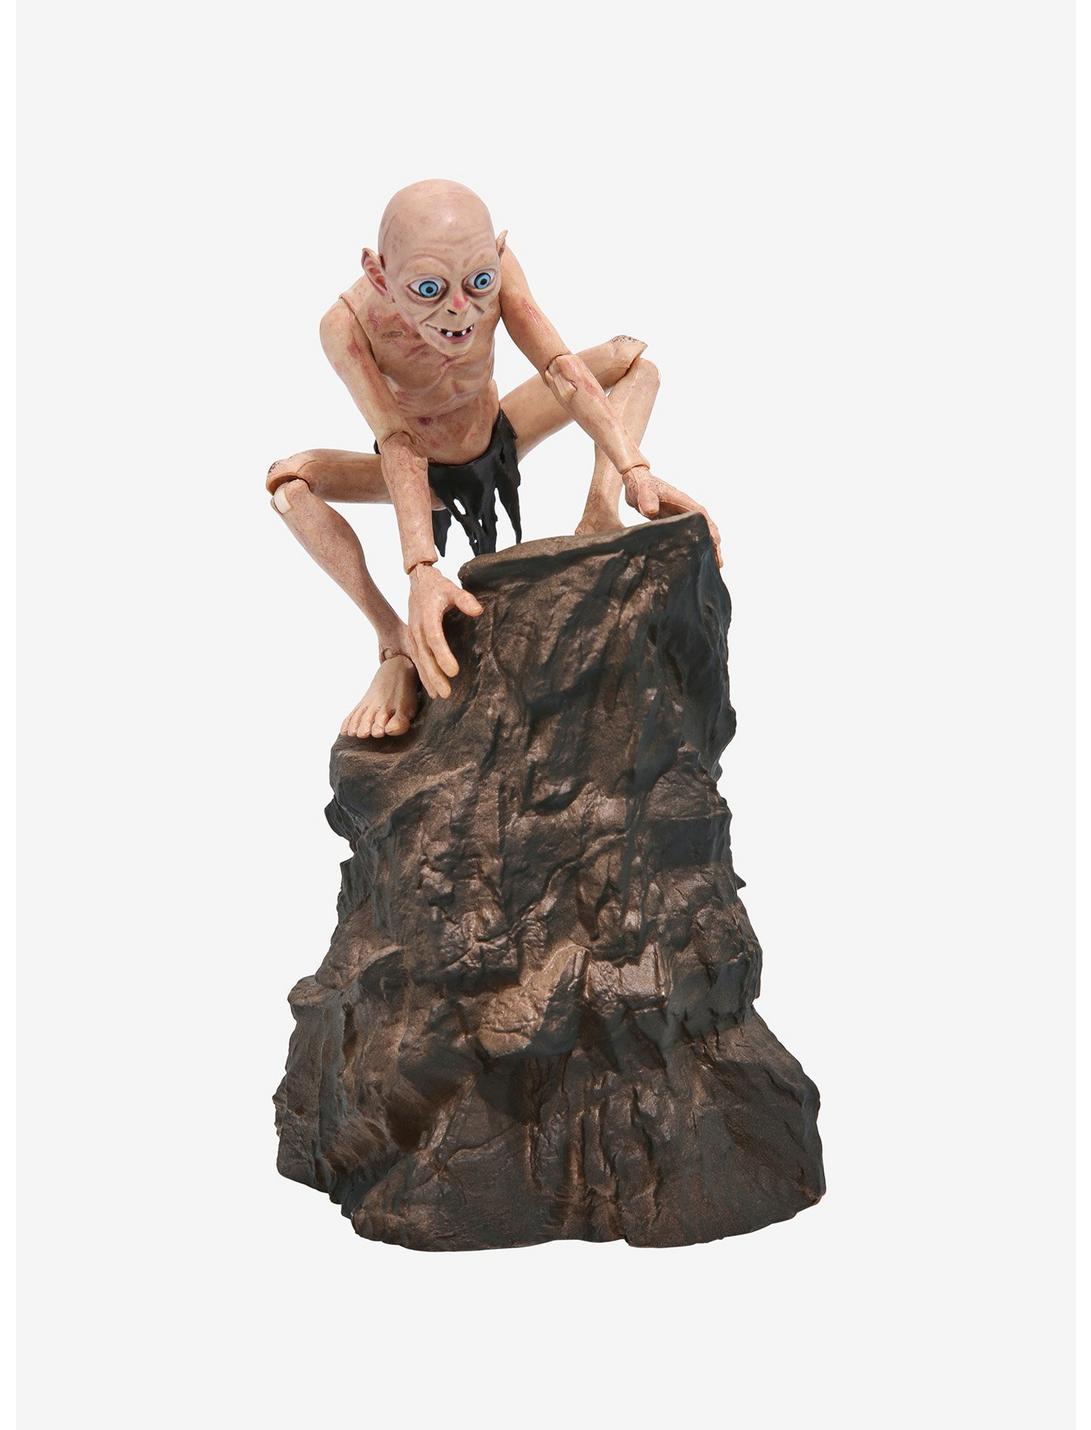 Diamond Select Toys The Lord of the Rings Select Deluxe Gollum Figure, , hi-res